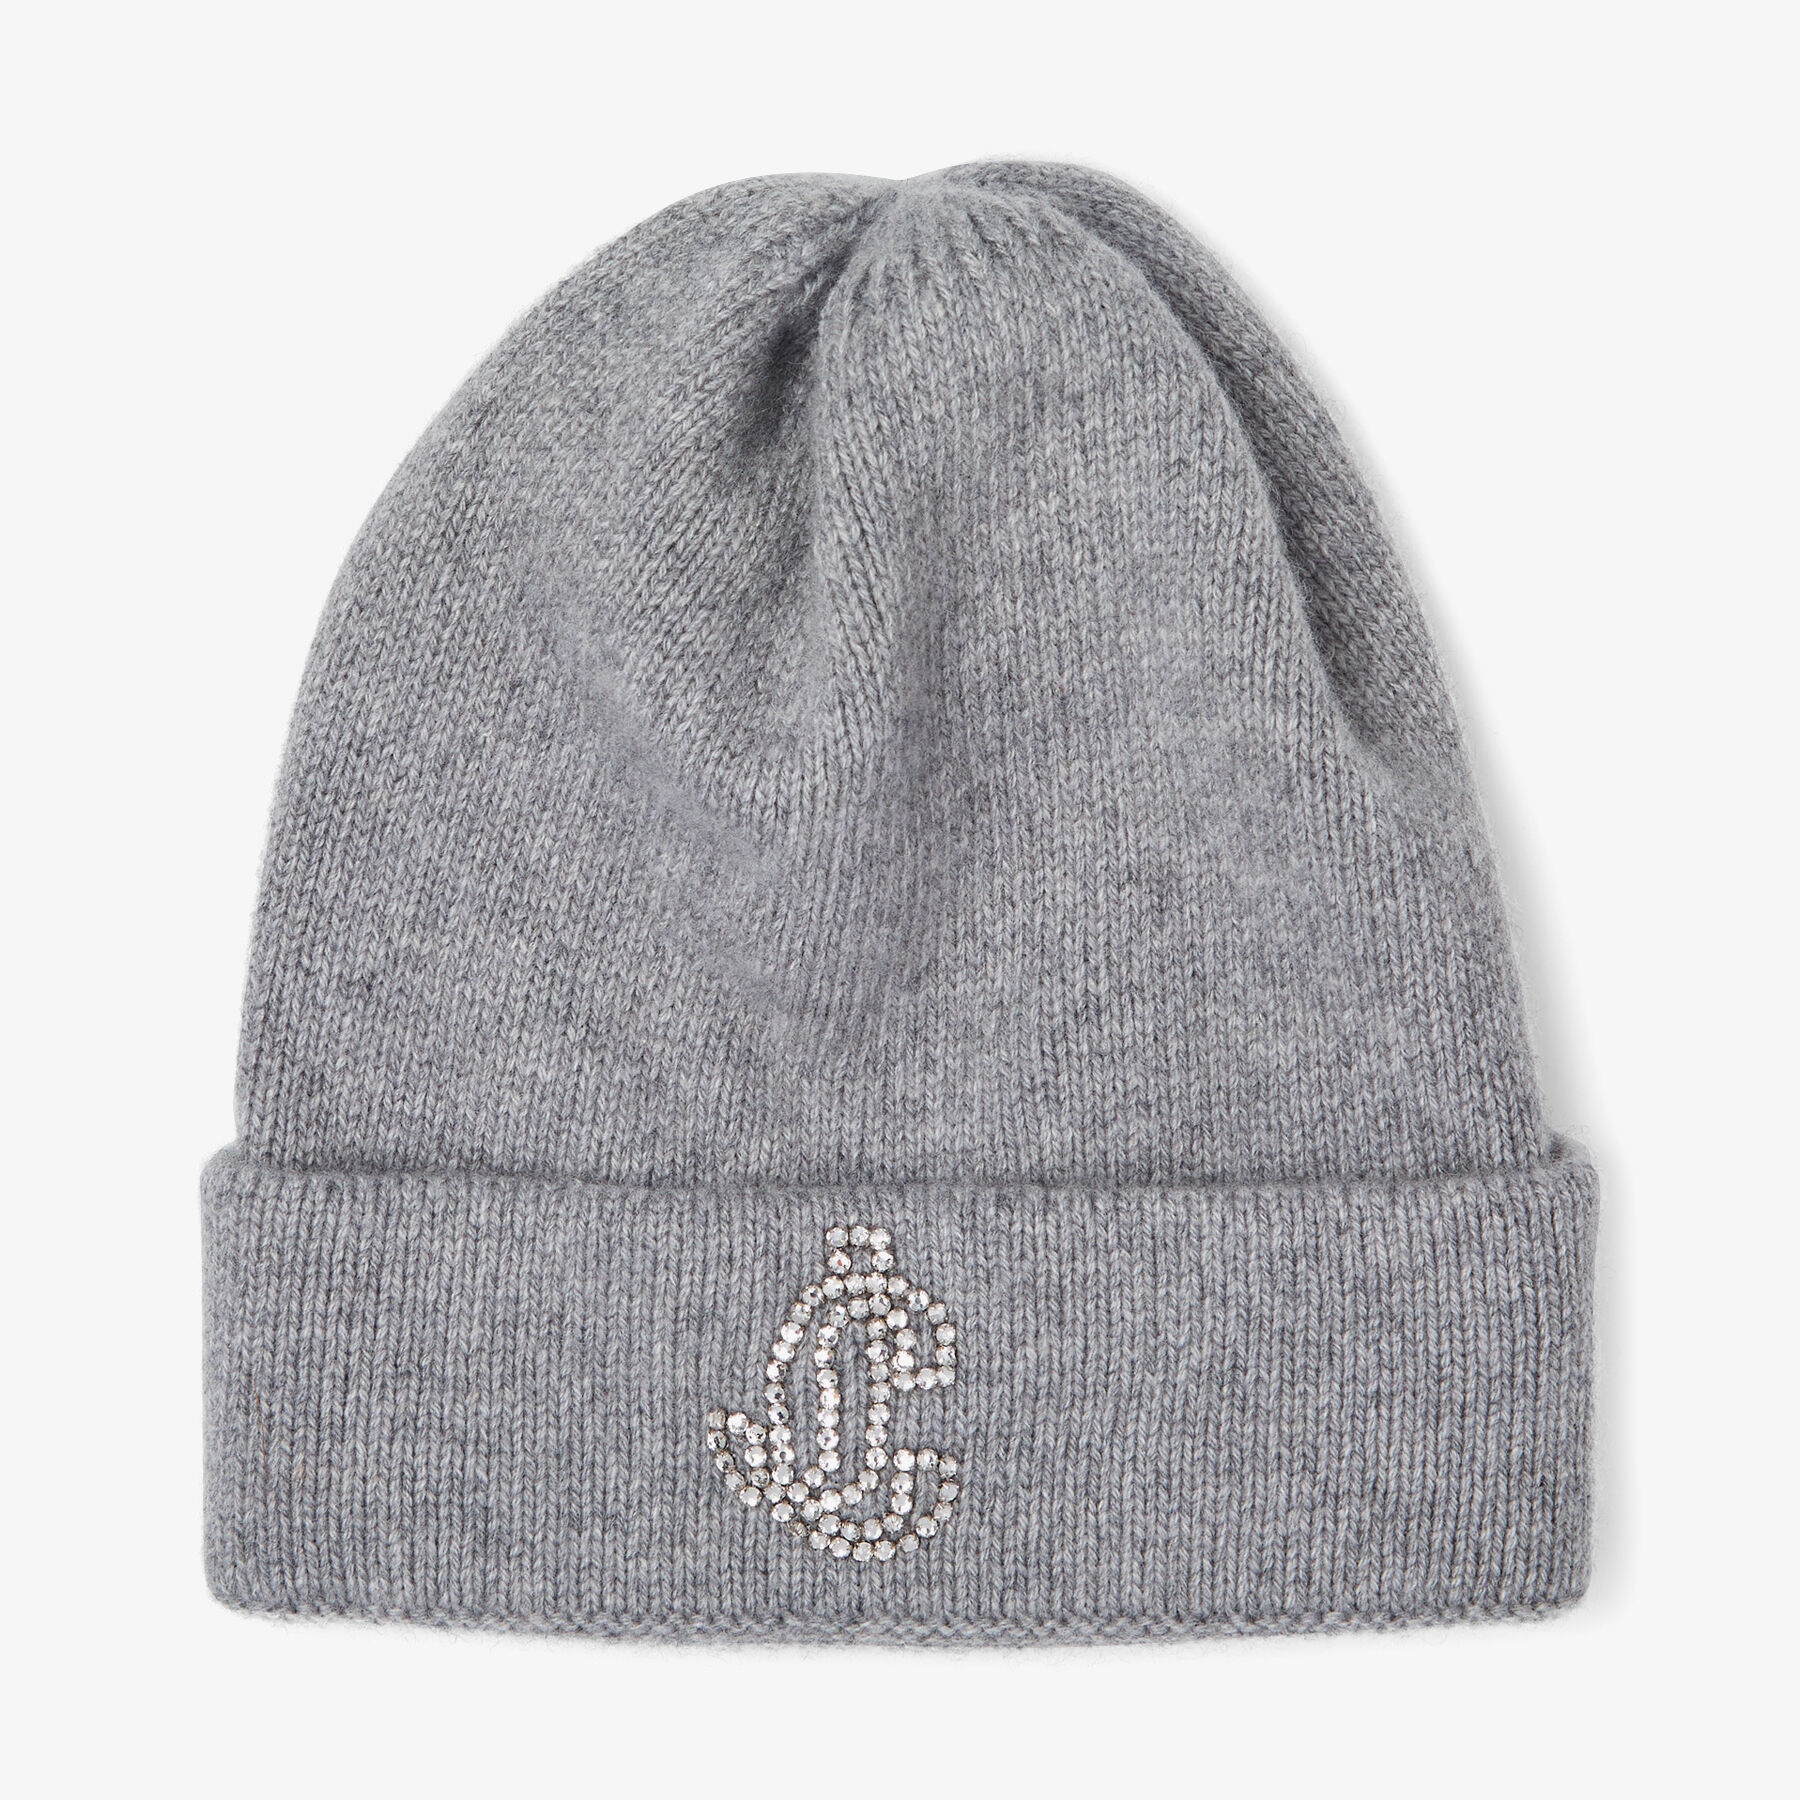 Ilse
Marl Grey Knitted Cashmere Hat with Embroidered Crystal JC Monogram - 1